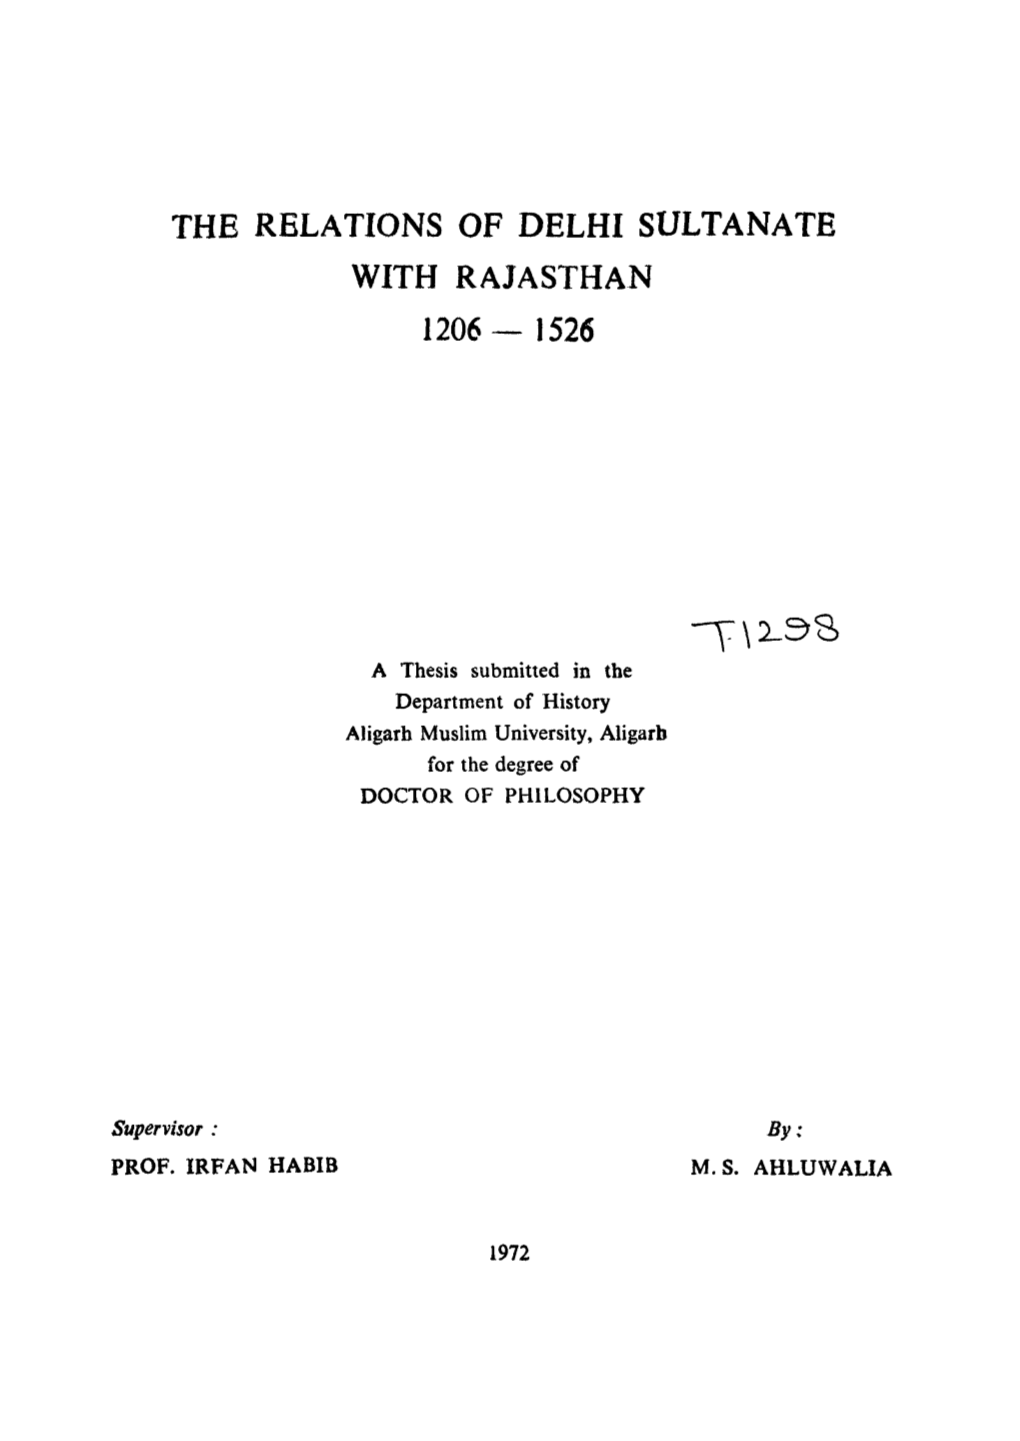 The Relations of Delhi Sultanate with Rajasthan 1206— 1526